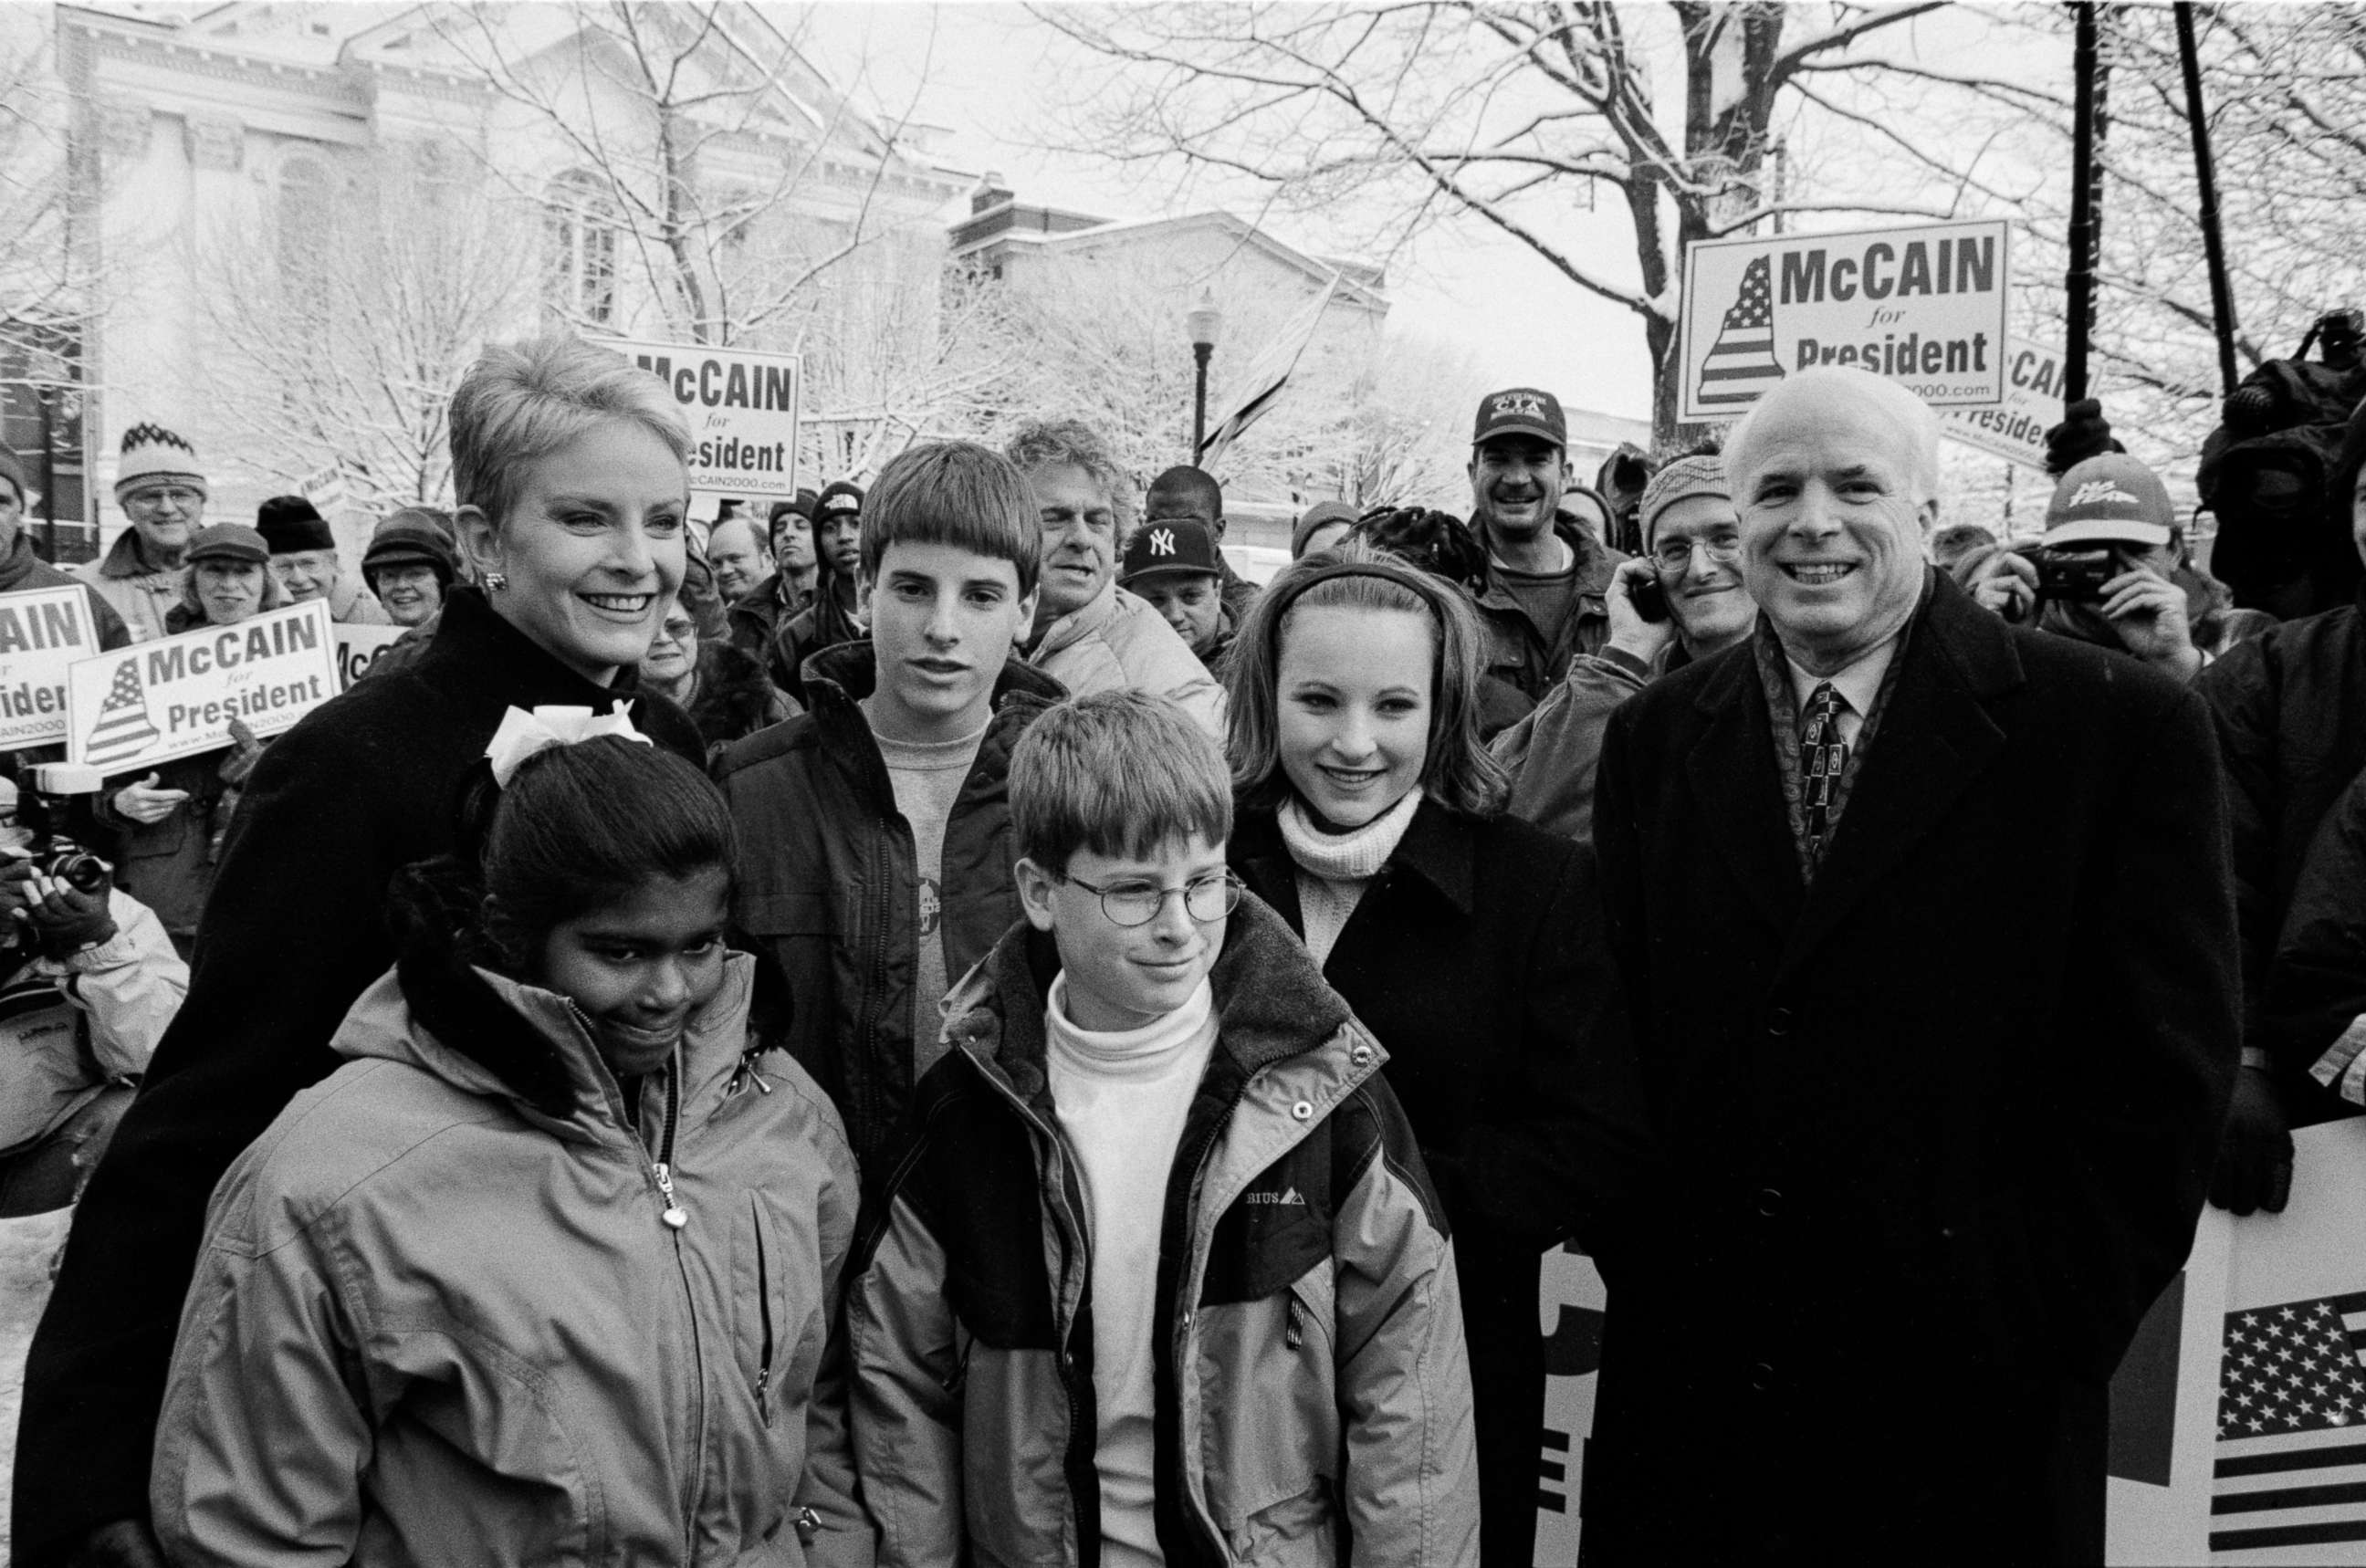 PHOTO: John and Cindy McCain attend a rally in the park with their family in Keene, N.H., Jan. 31, 2000. From left, daughter Bridget, sons Jack and Jimmy, and daughter Meghan.  January 31, 2000 in Keene, New Hampshire.